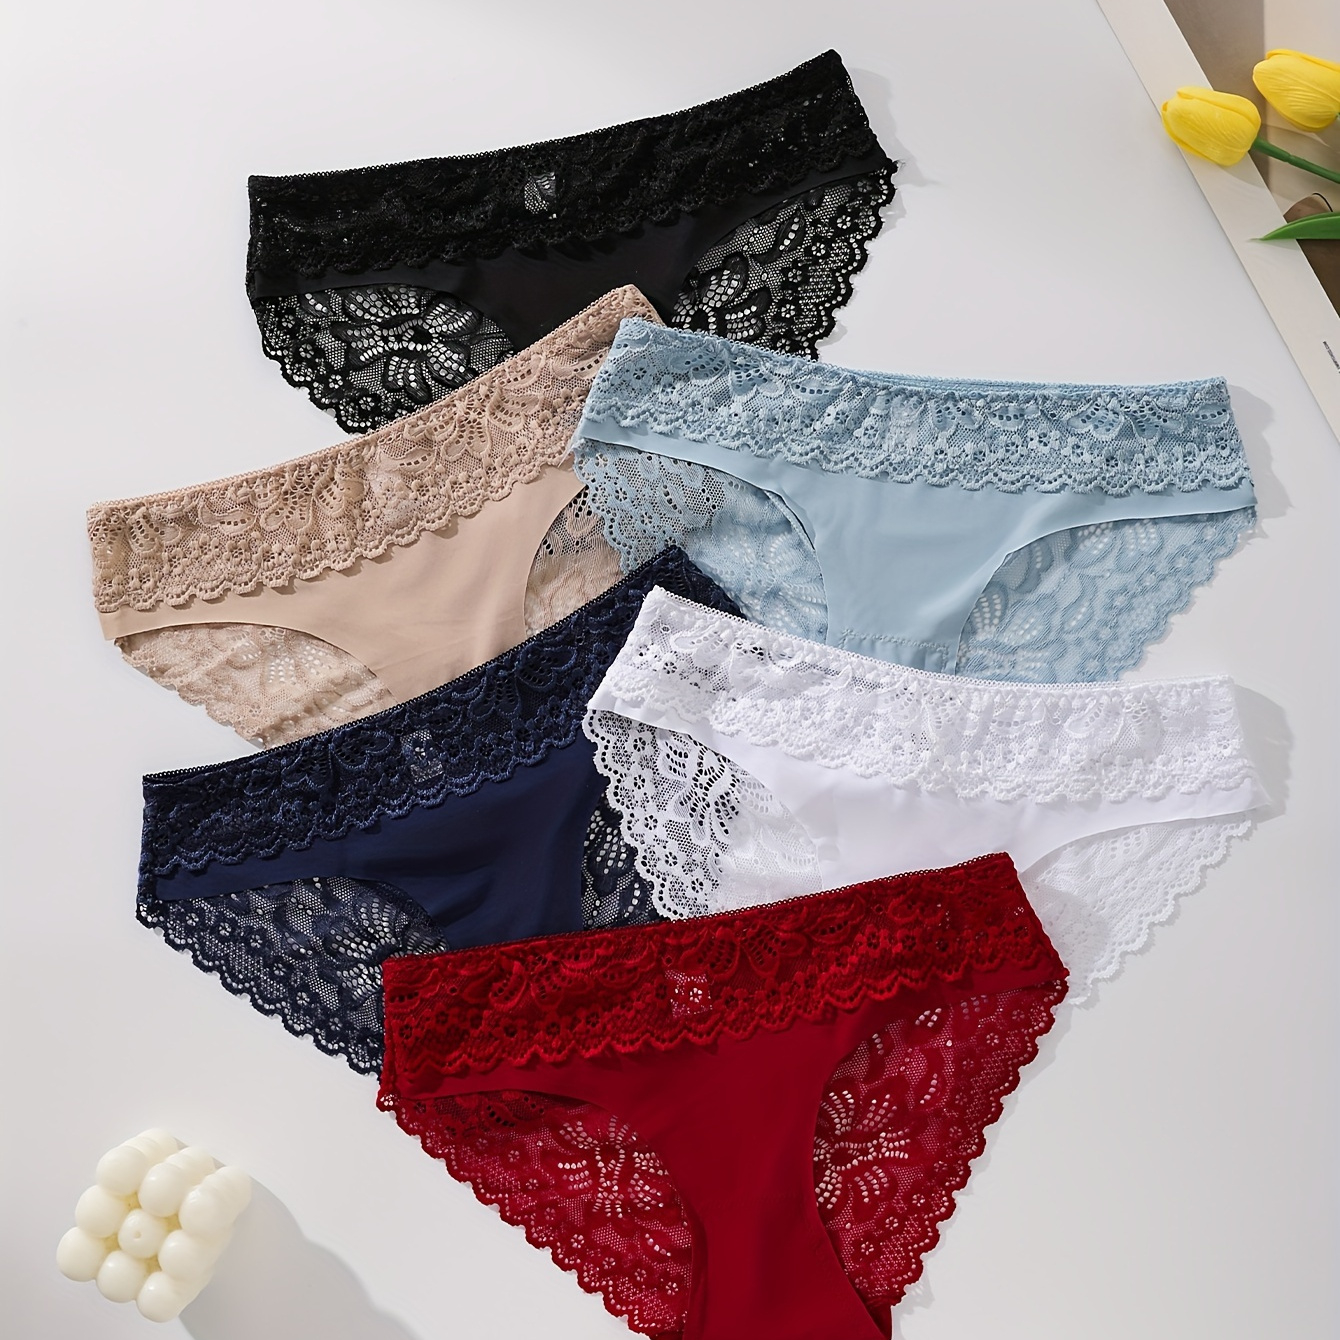 

6pcs Solid Floral Lace Semi Sheer Seamless Briefs, Sexy Comfy Breathable Stretchy Intimates Panties, Women's Lingerie & Underwear